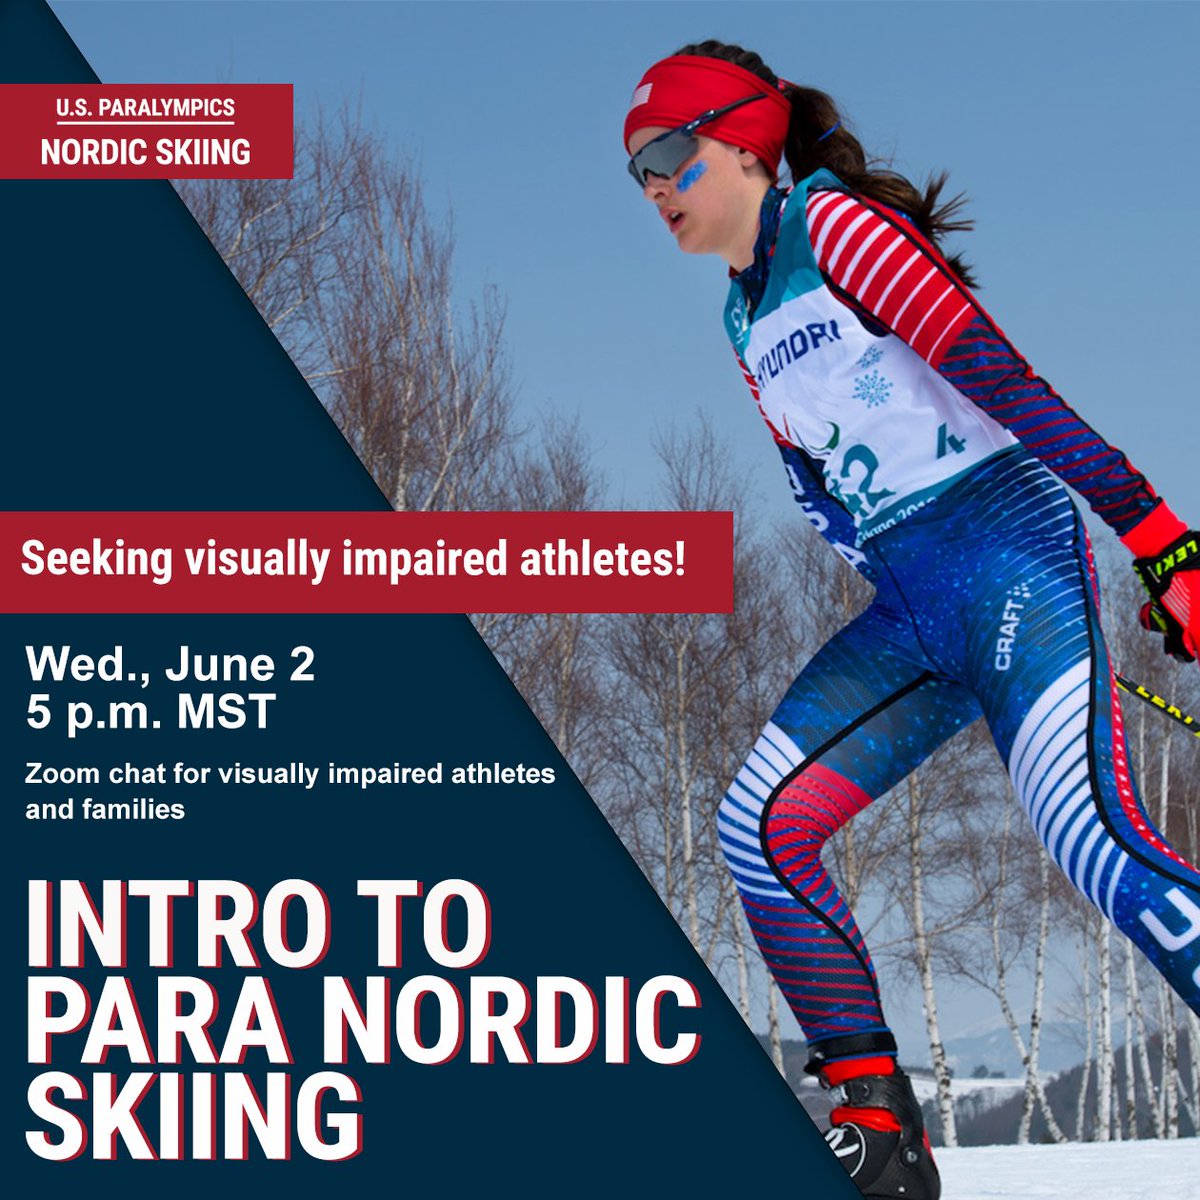 Calling all visually impaired athletes! Are you interested in Para Nordic skiing? Join us for an introductory Zoom conversation for VI athletes of all ages! Please email us at uspnordic@gmail.com if you would like to join the call, and we will follow up with a link.